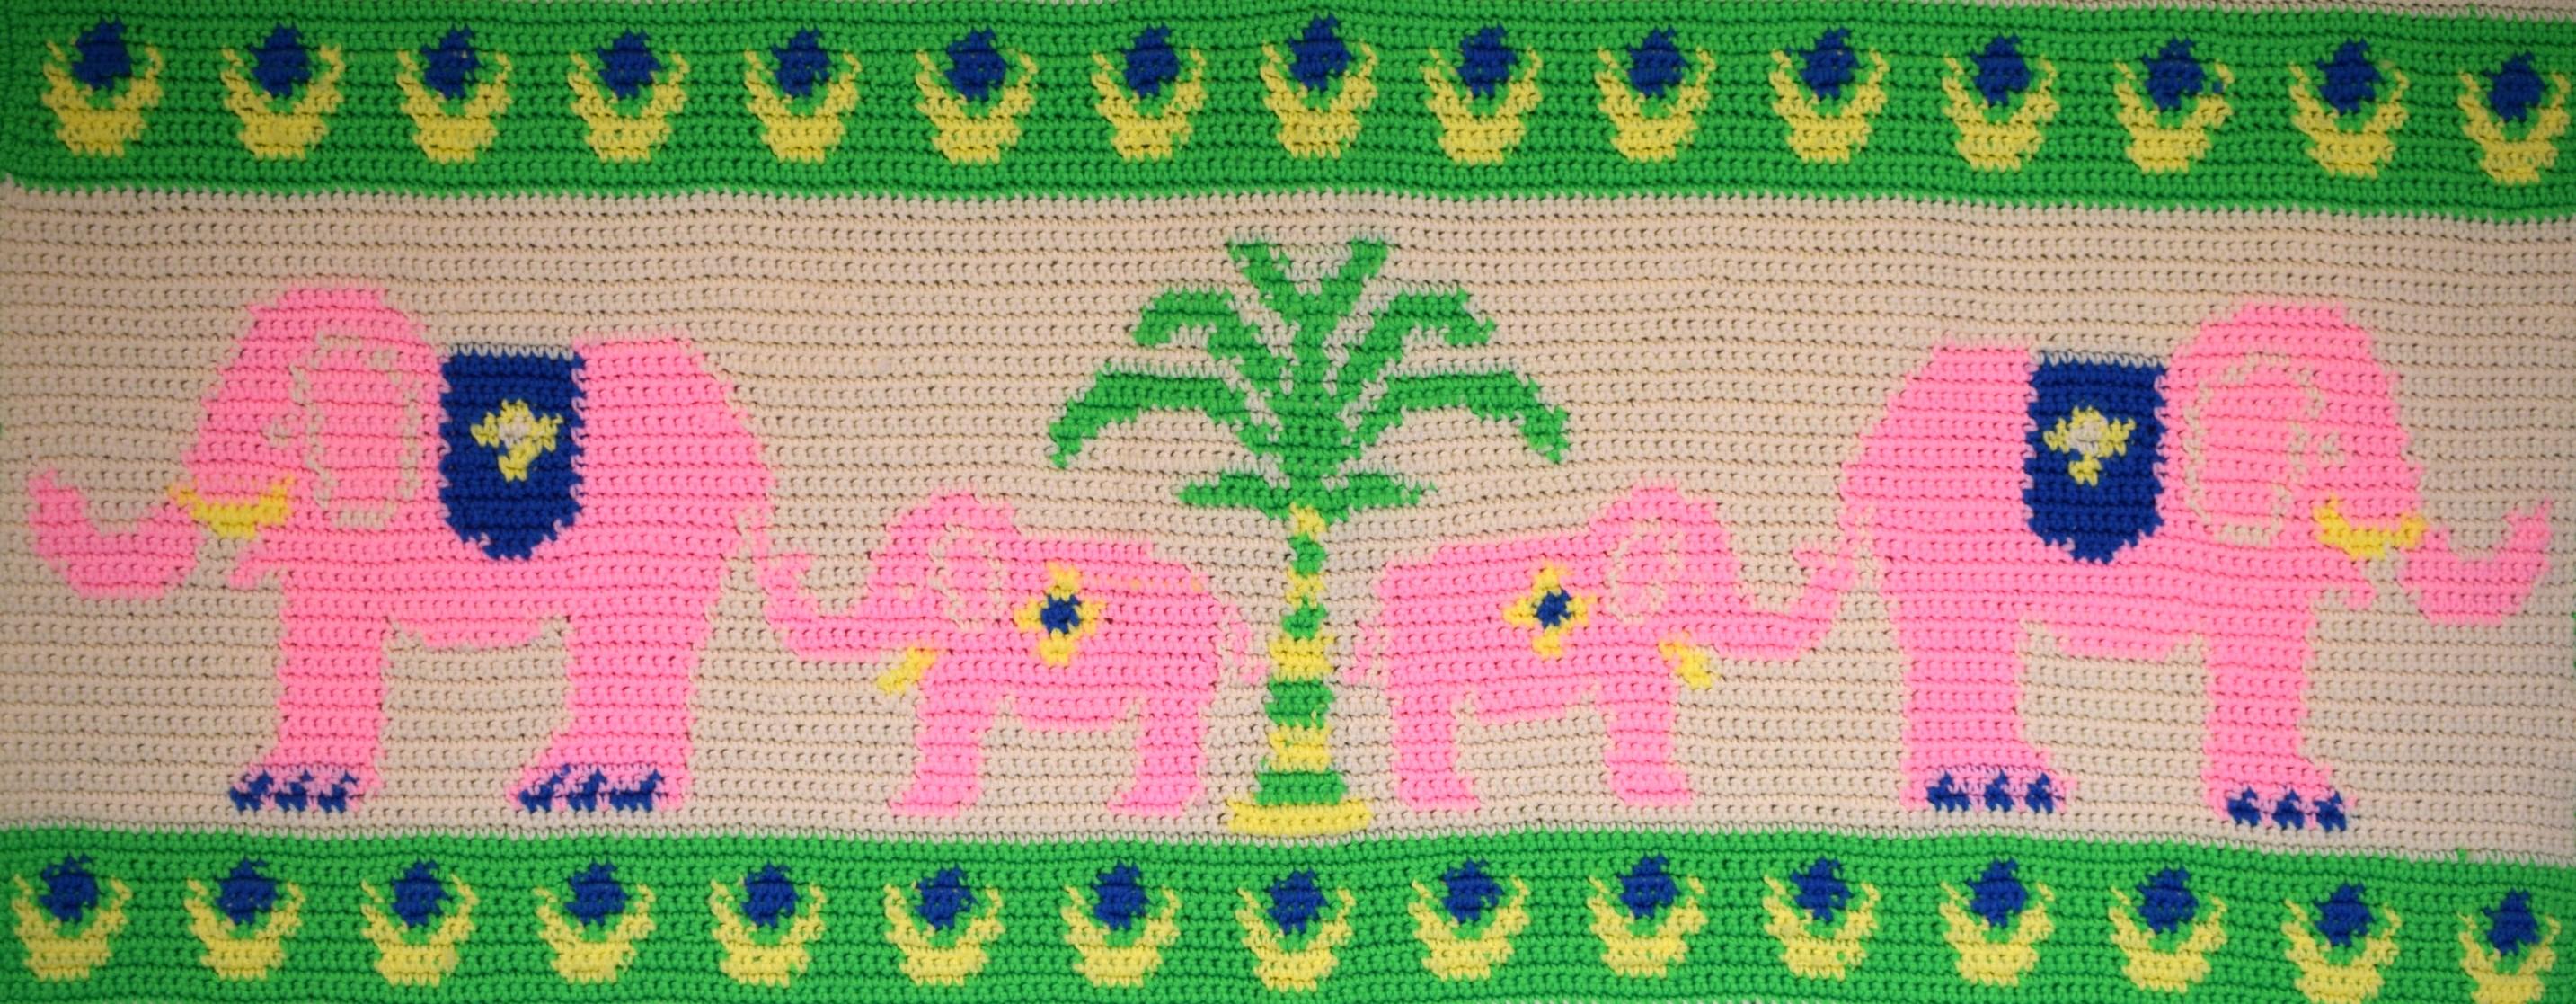 Hand-Crochet 4-Panel Blanket/ Tapestry w/ a Tropical Parade of Exotic Animals For Sale 1